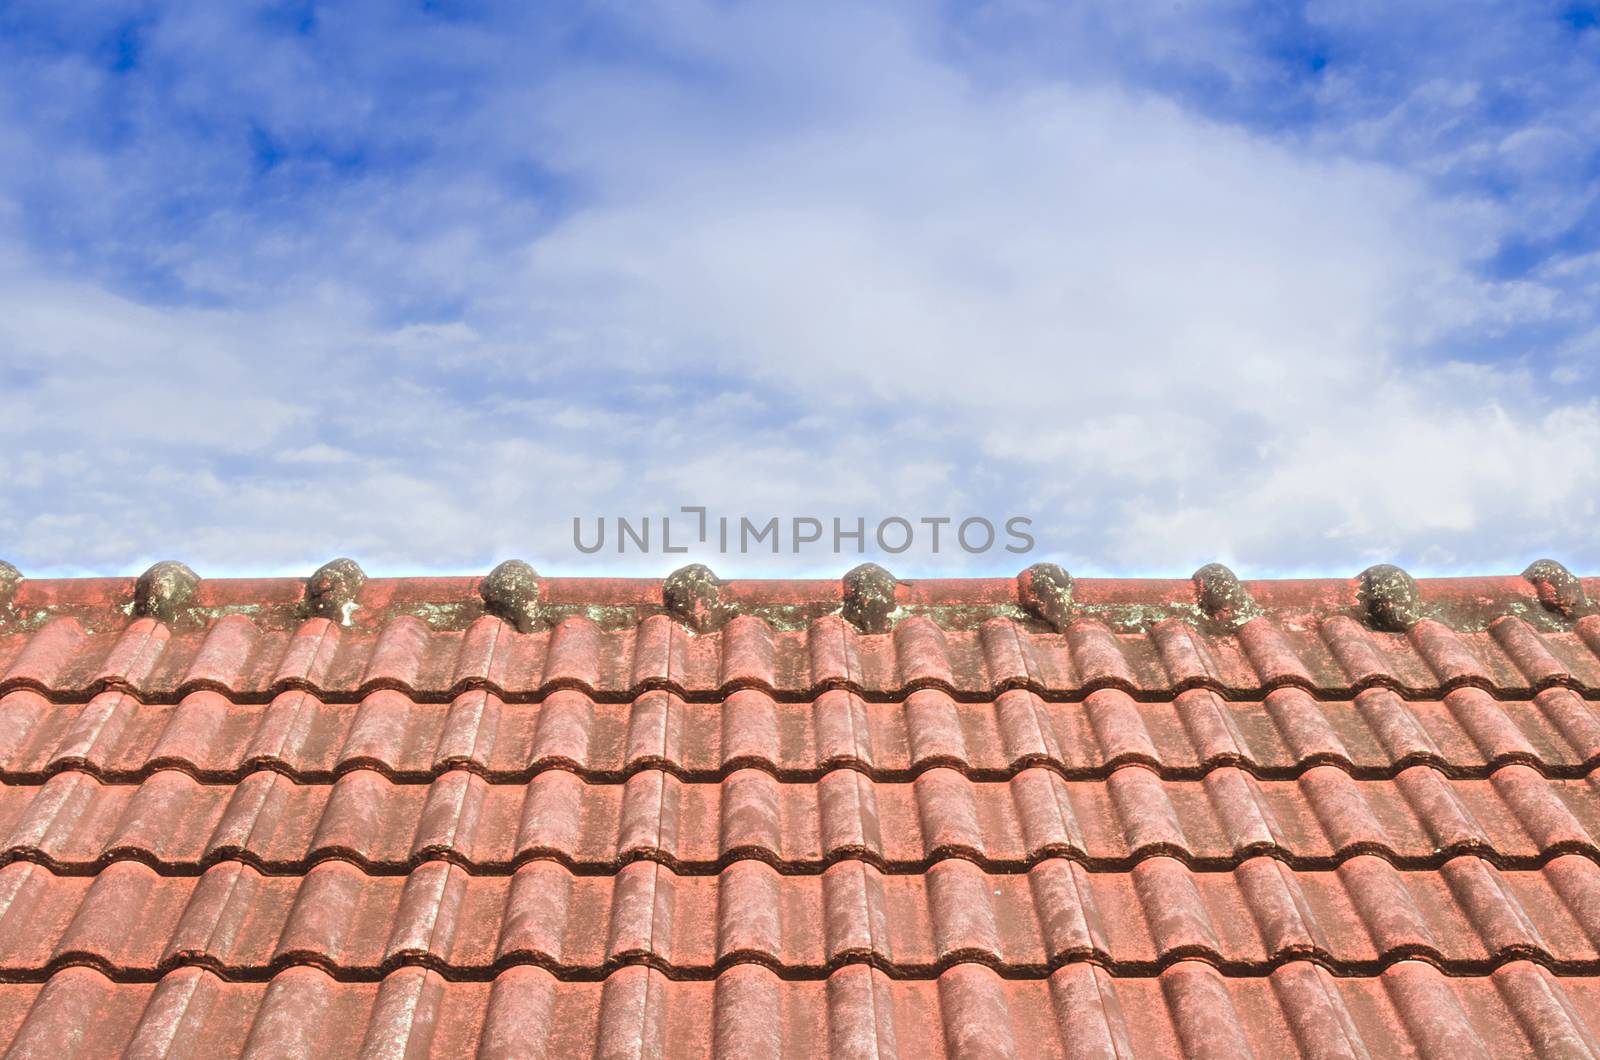 The Tiled Roof with Fluffy Cloud Blue Sky 106